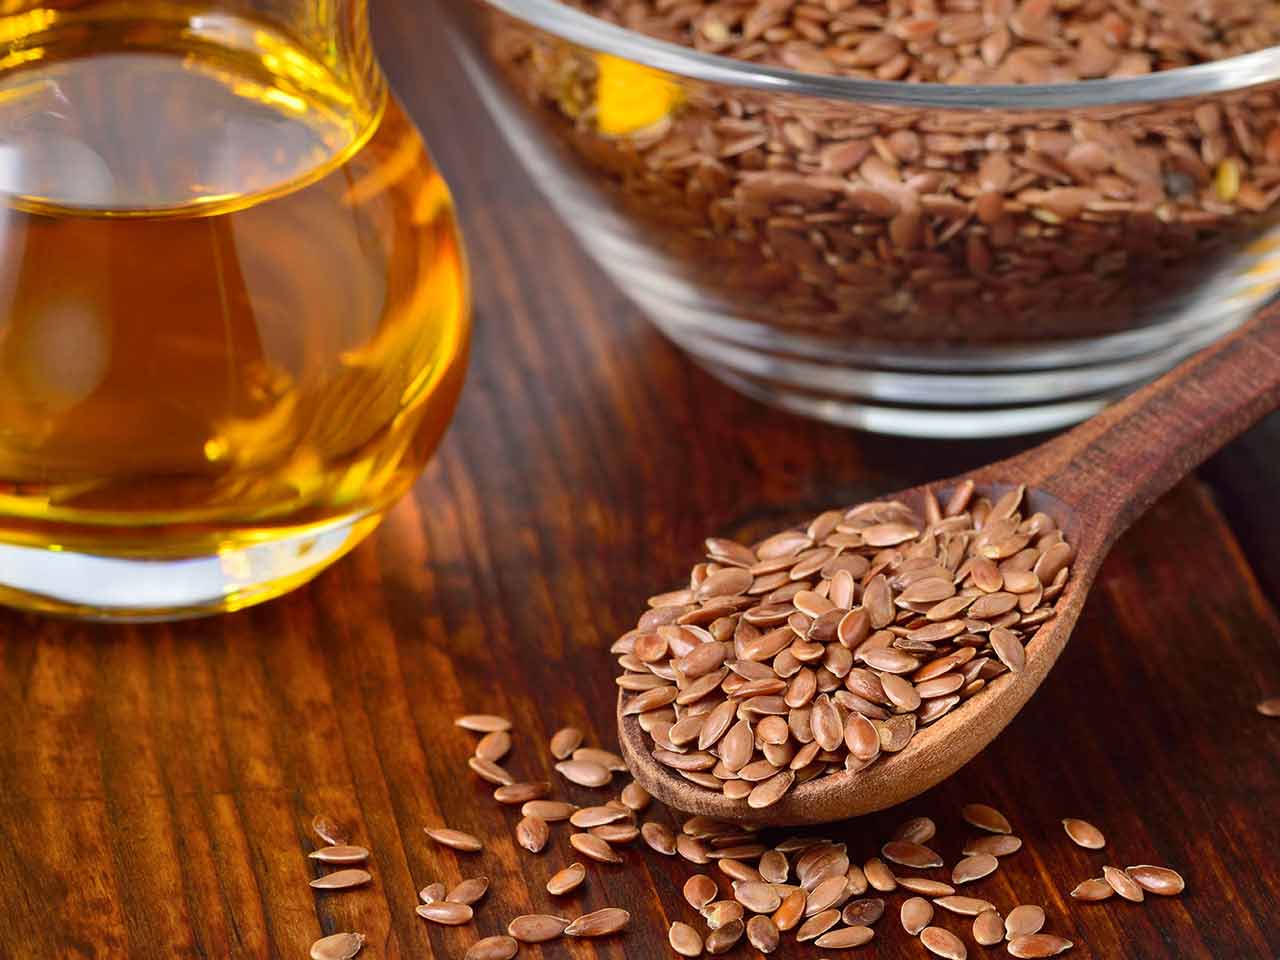 Whole flax seeds and flax seed oil